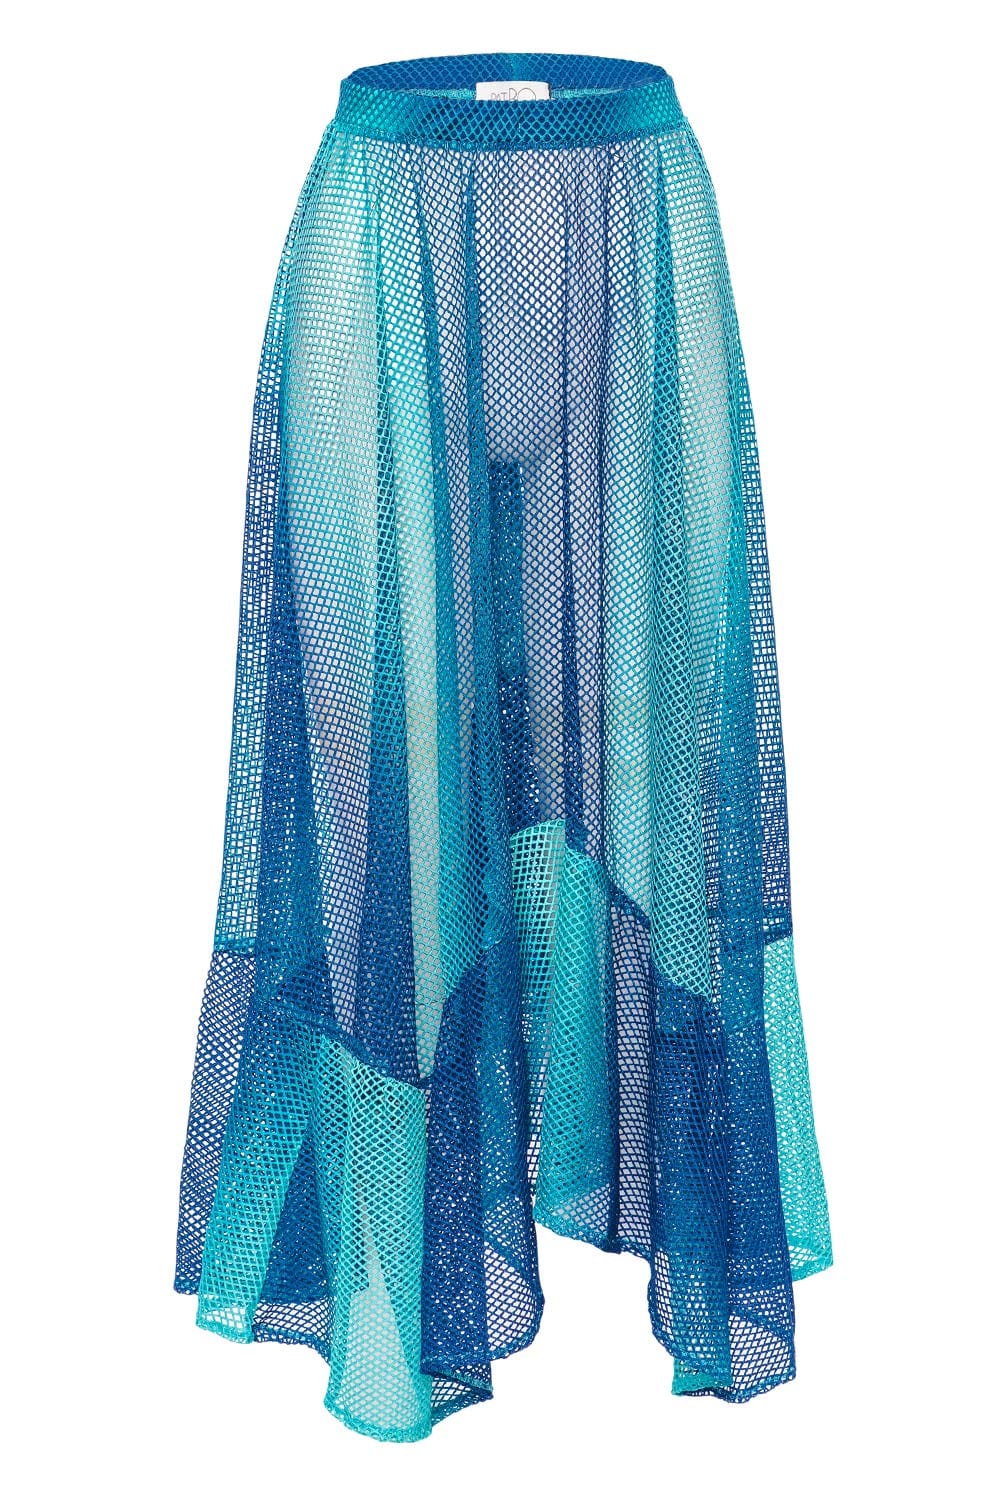 PatBO Ombre Netted Beach Skirt SAL27058US HIGH TIDE